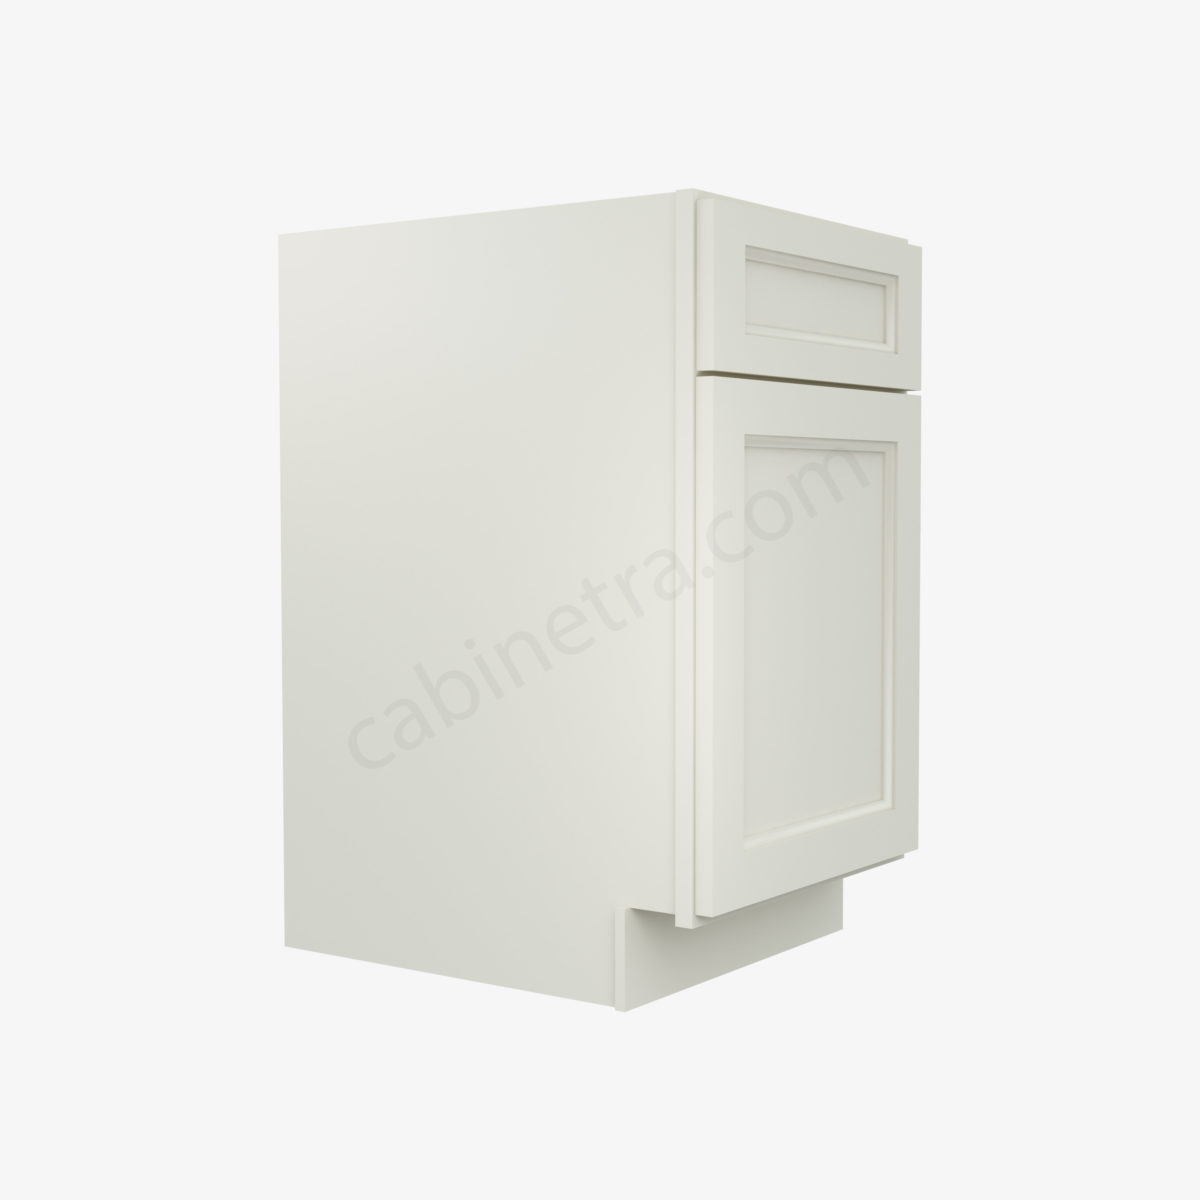 TQ B18 4 Forevermark Townplace Crema Cabinetra scaled